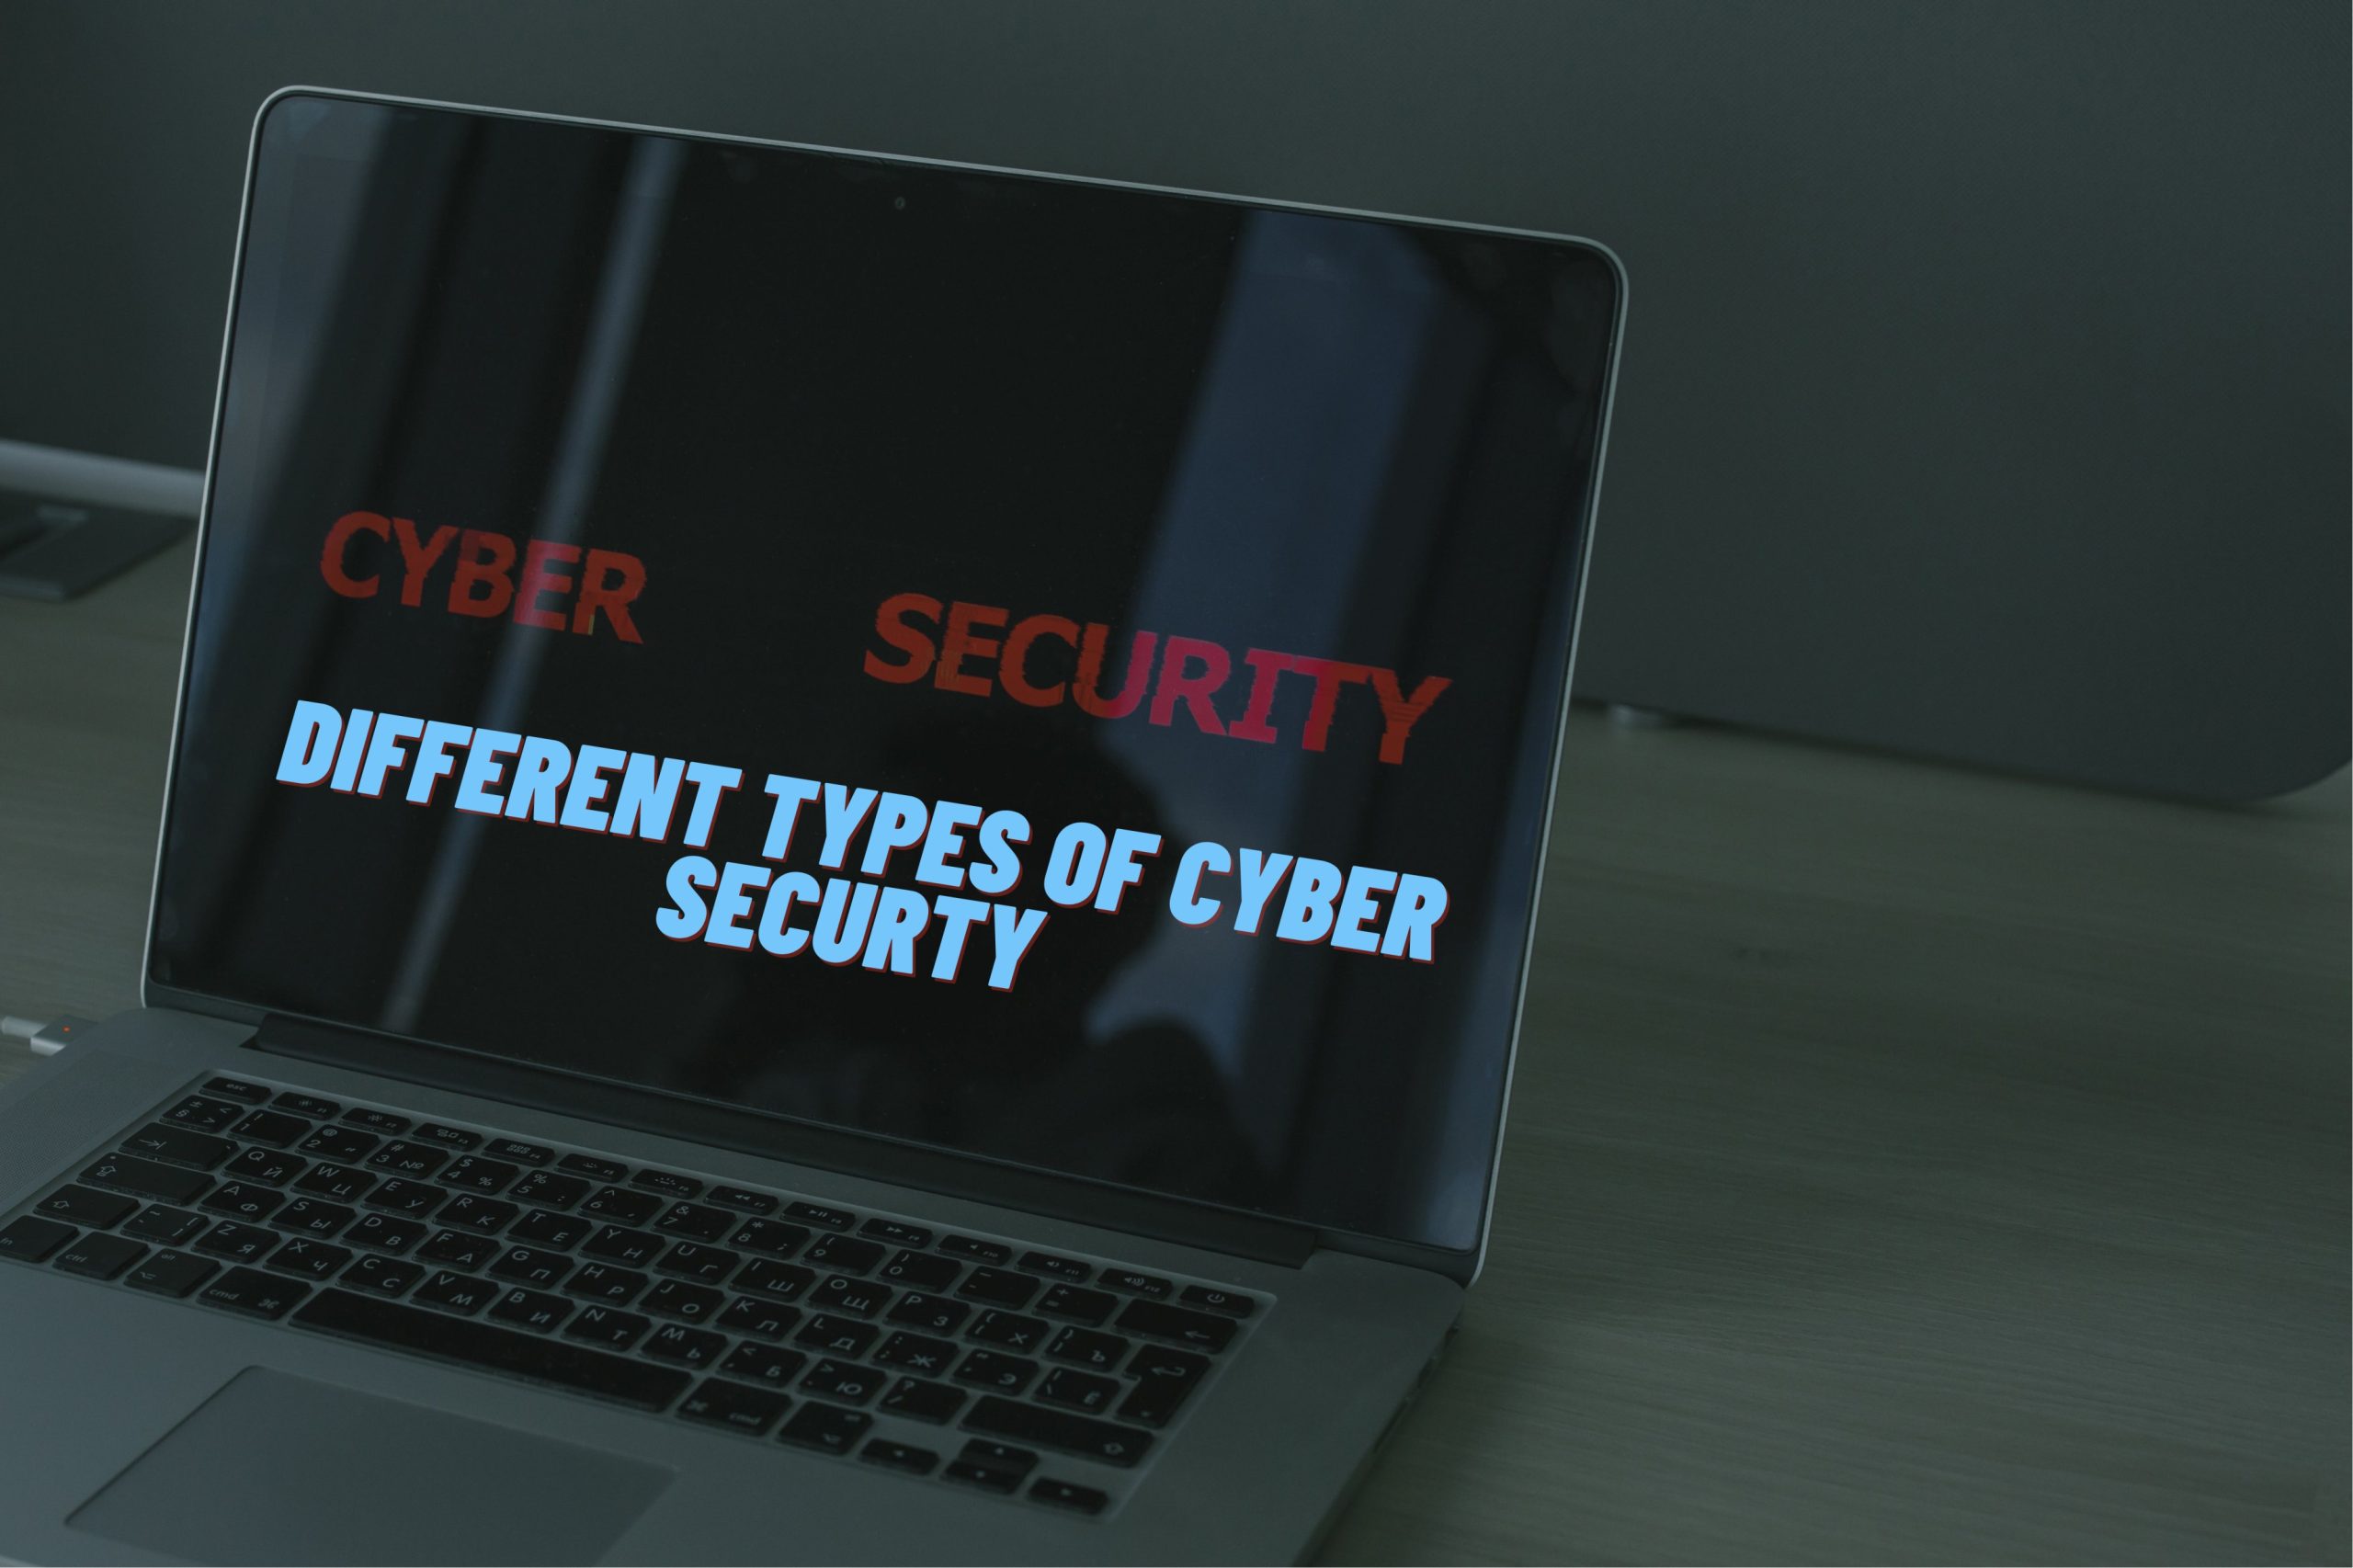 What are the different types of Cyber Security